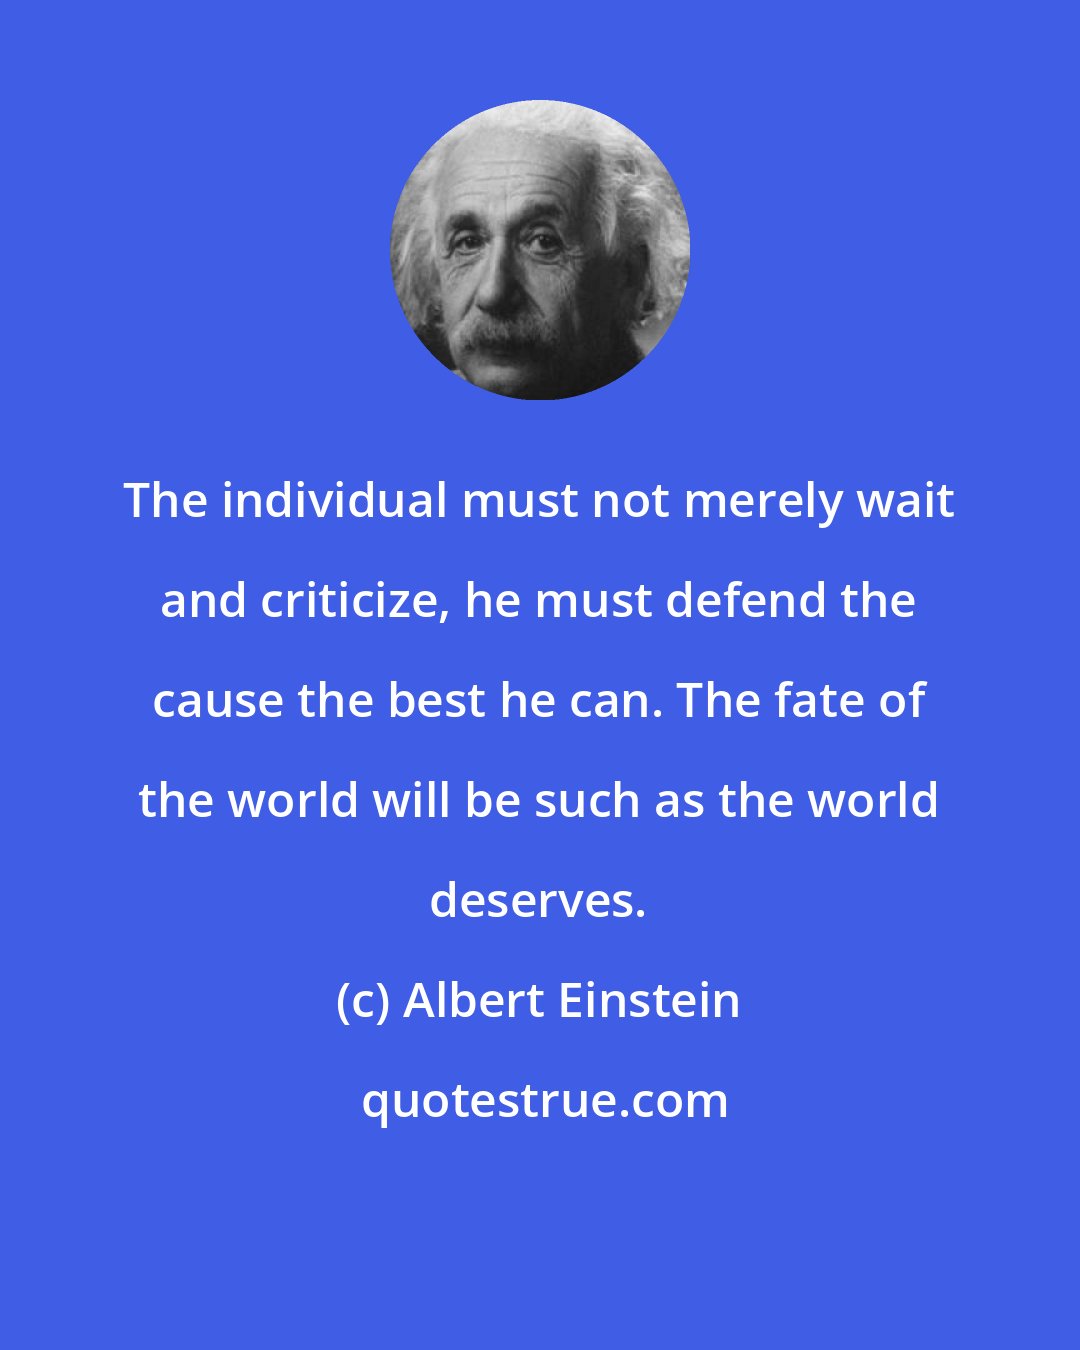 Albert Einstein: The individual must not merely wait and criticize, he must defend the cause the best he can. The fate of the world will be such as the world deserves.